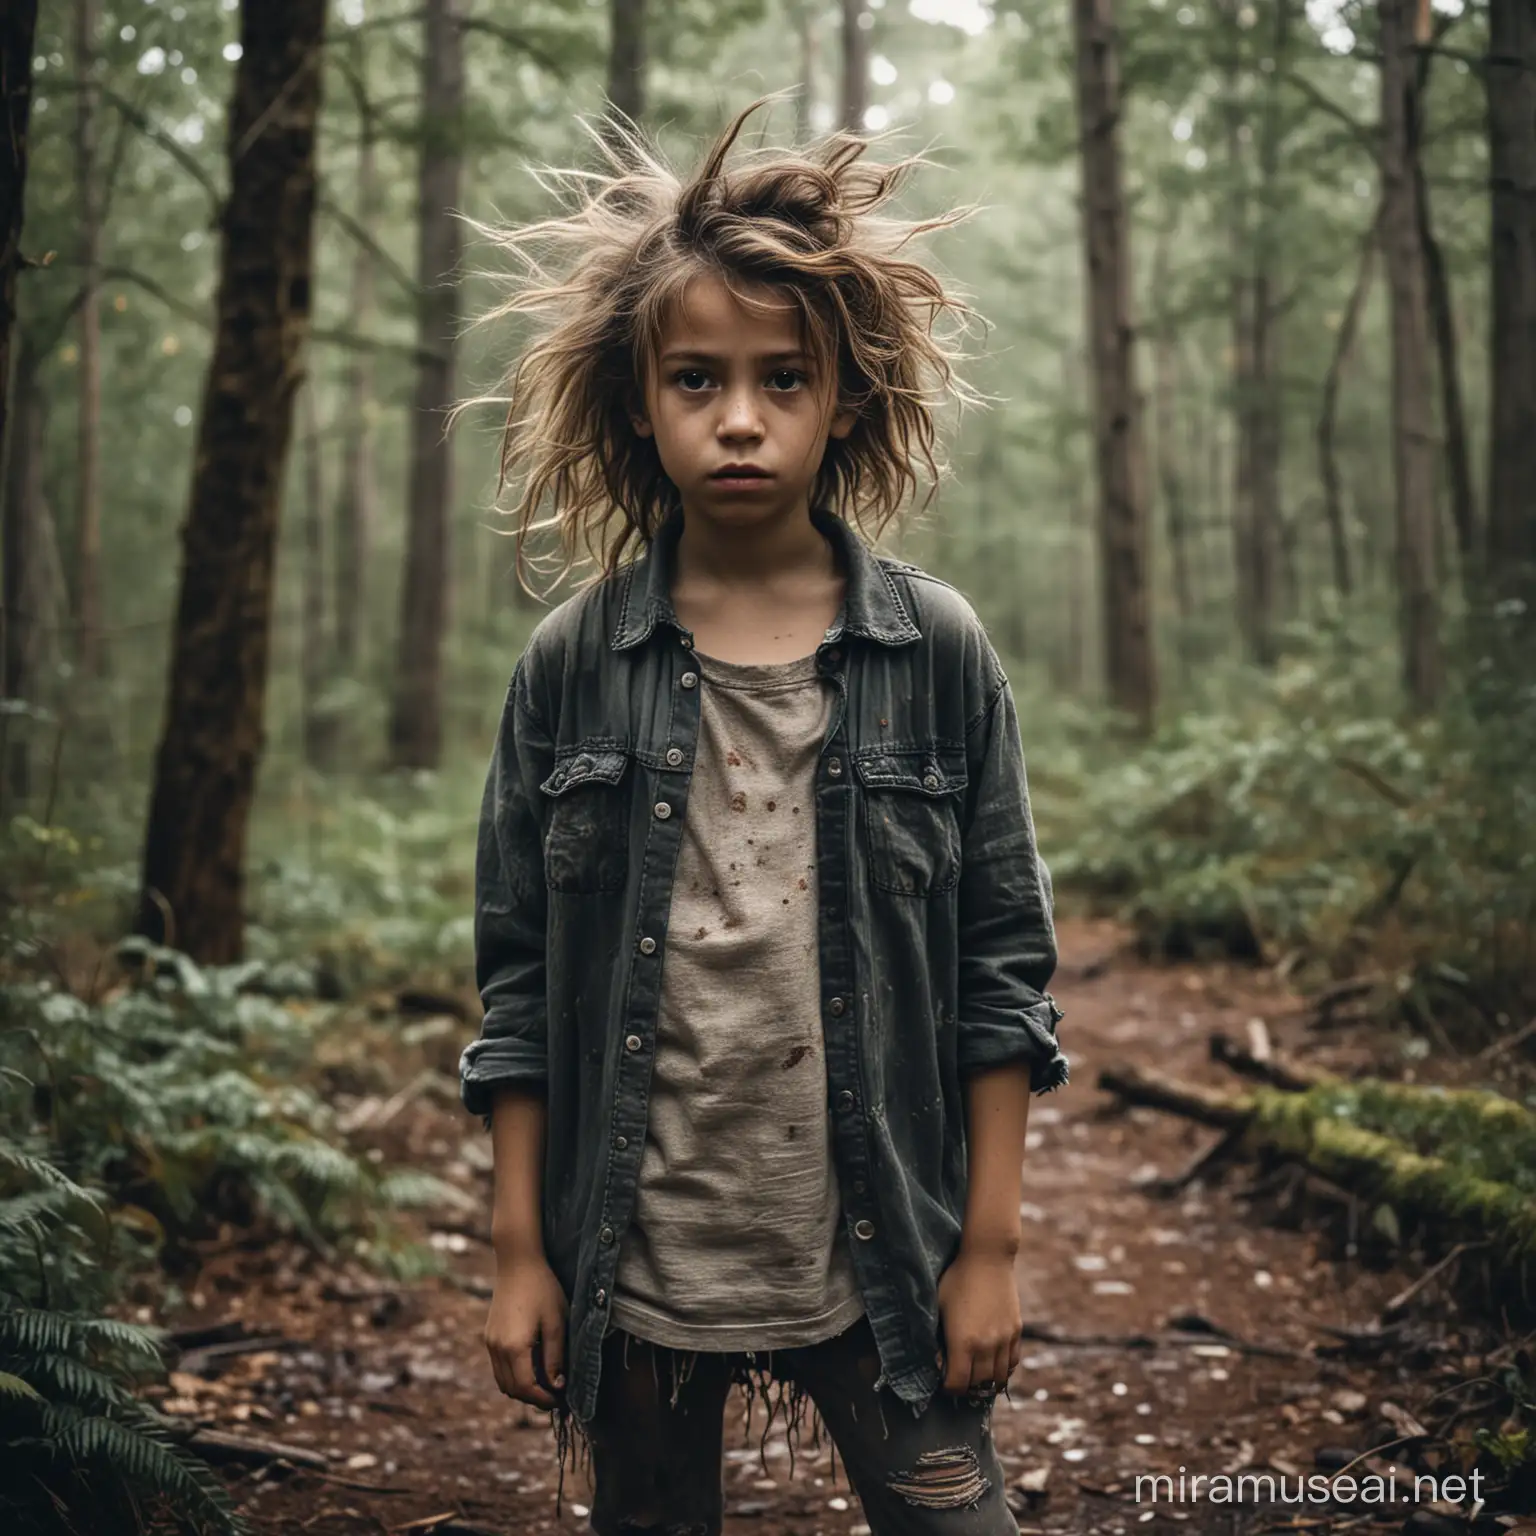 Moody Forest Young Girl with Crazy Hair in Ratty Clothes